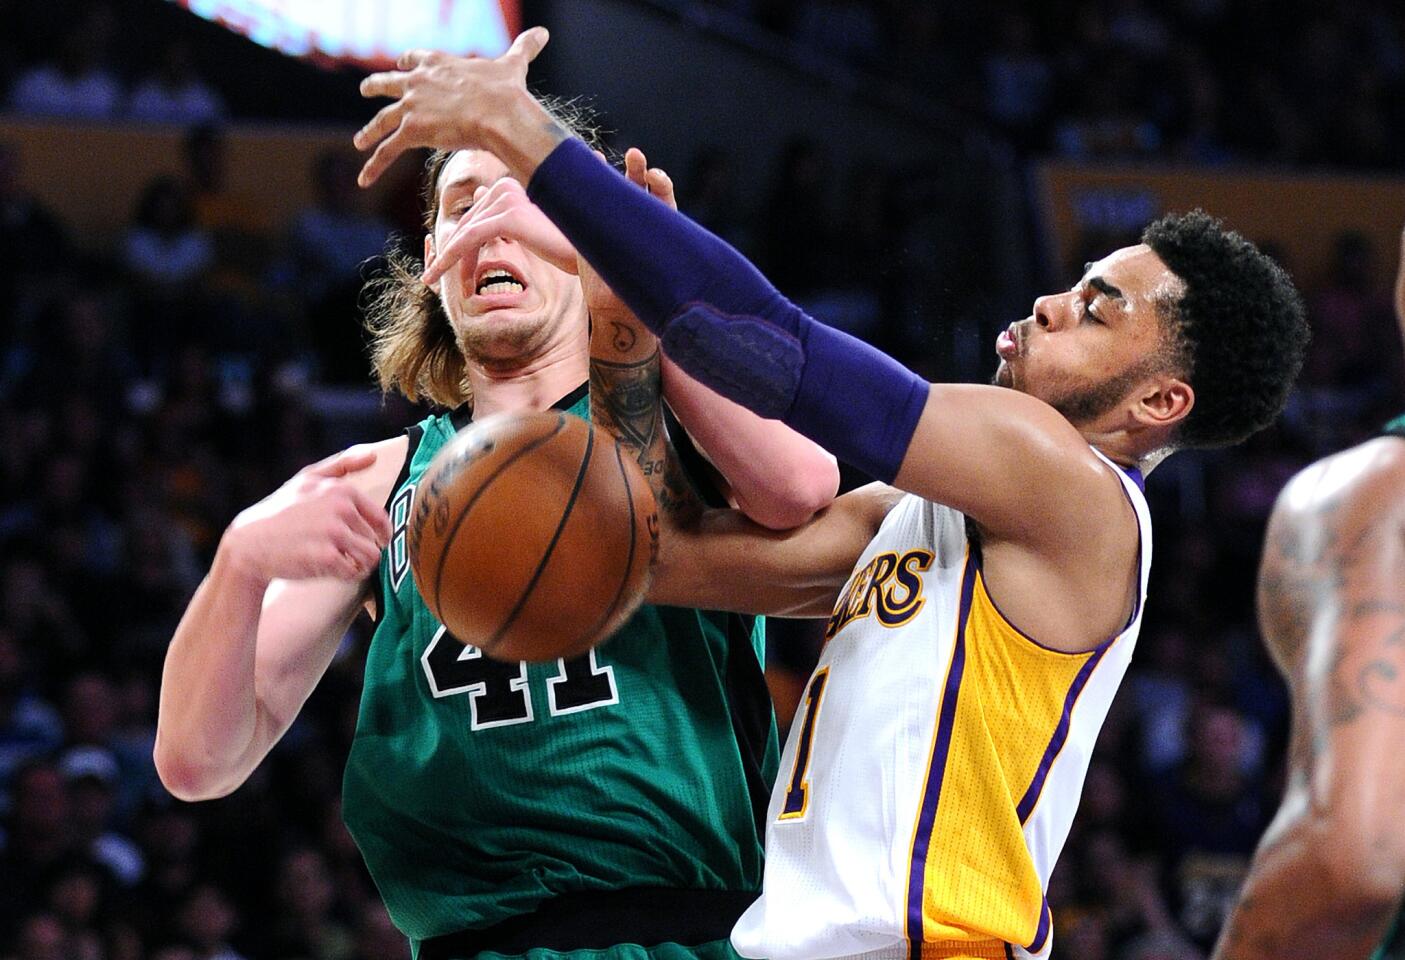 Lakers guard D'Angelo Russell, knocking the ball away from Celtics forward Kelly Olynyk during a game last season, knows that a good offense often starts with good defense.